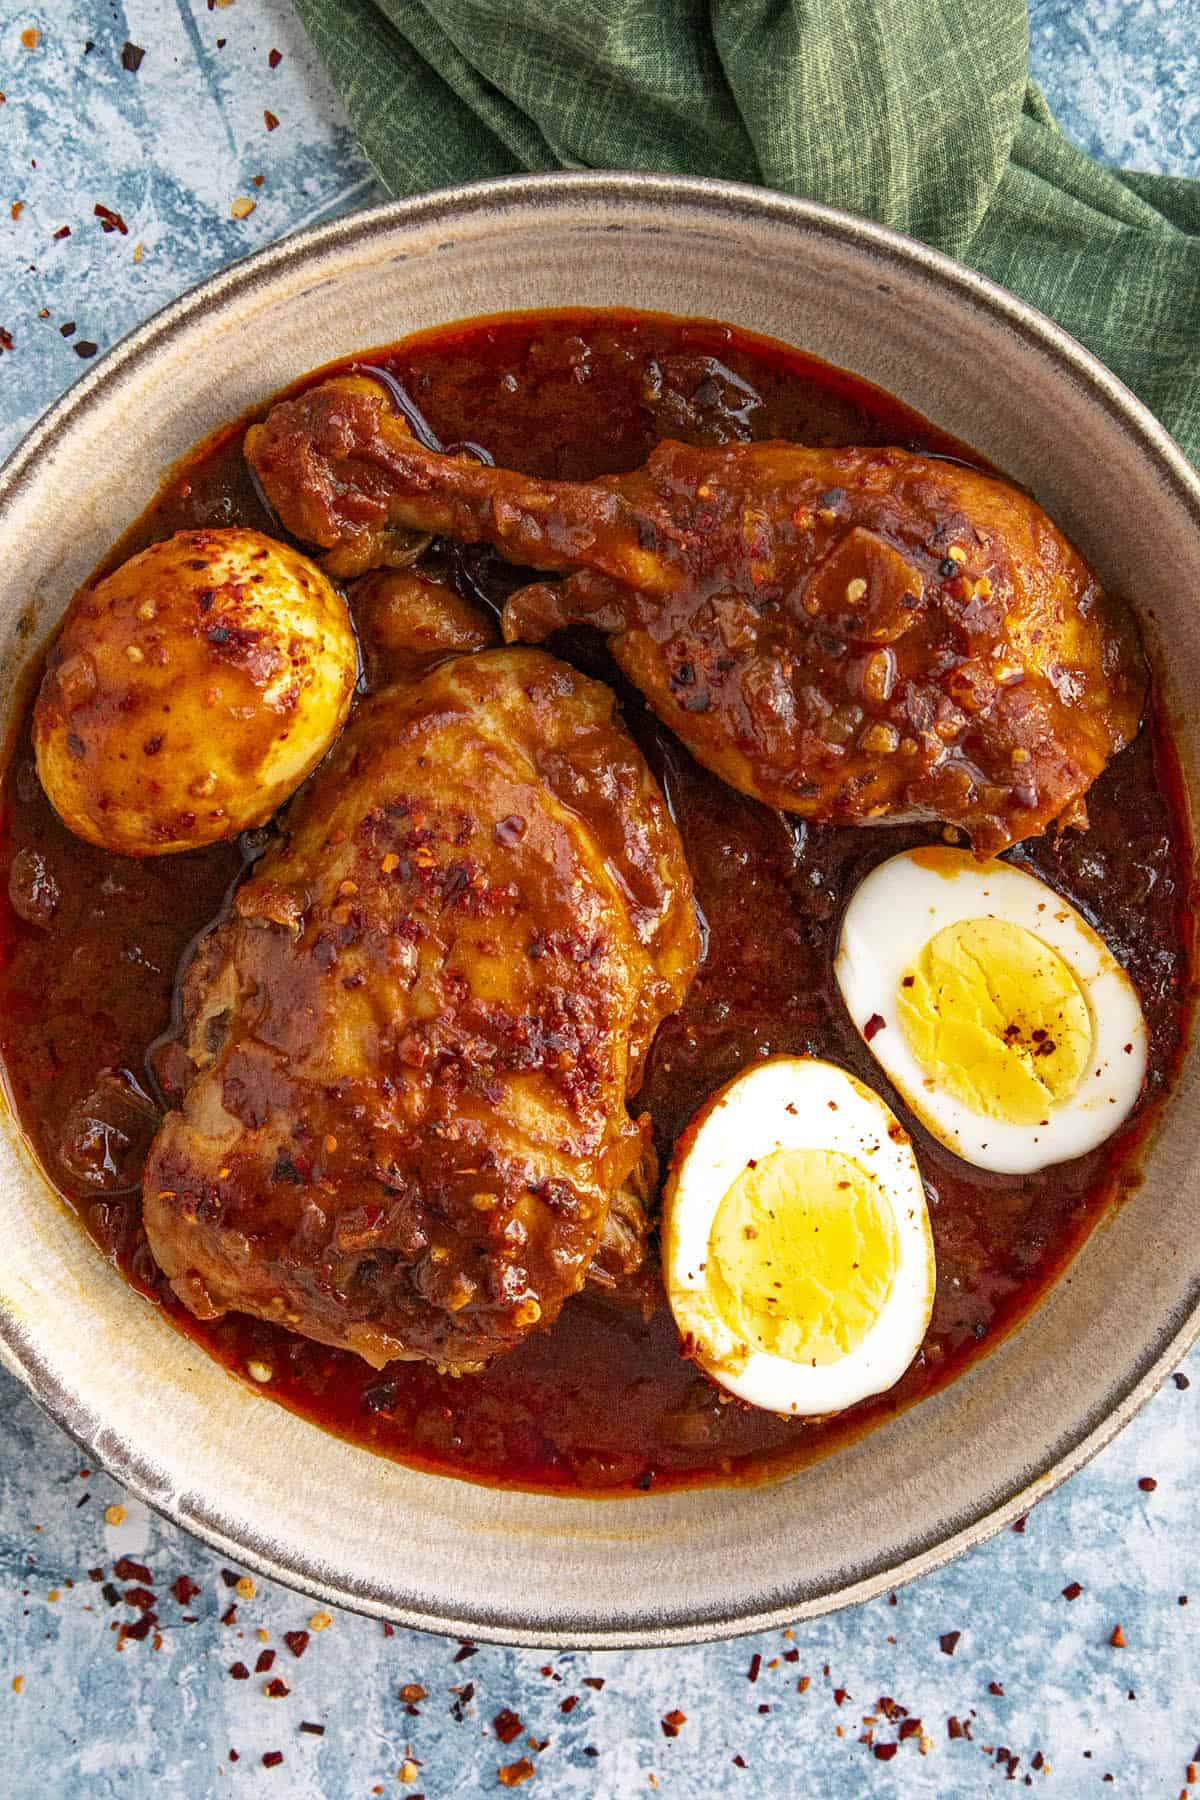 Doro Wat (Ethiopian Chicken Stew) in a bowl with sliced hard boiled eggs.